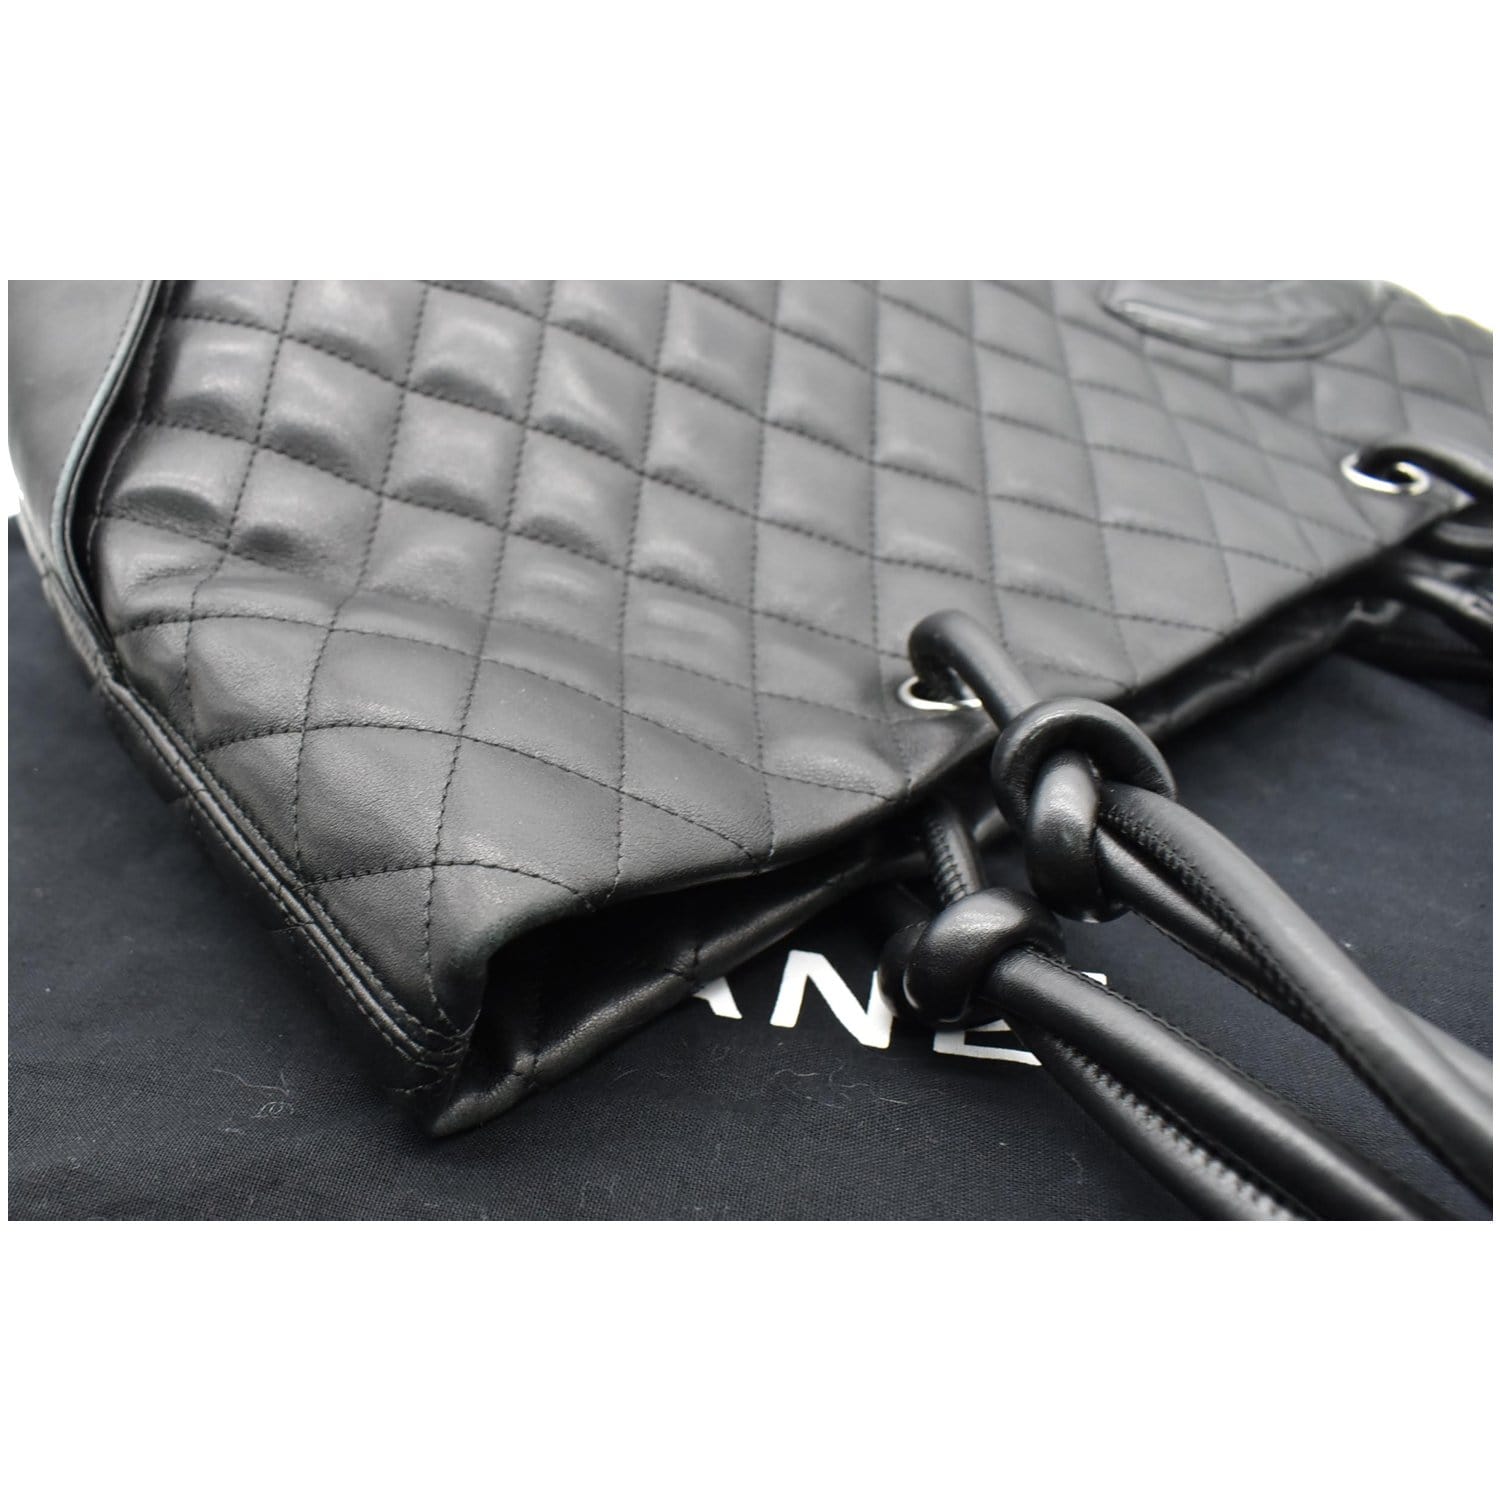 CHANEL Cambon Ligne Quilted Calfskin Leather Tote Bag Black